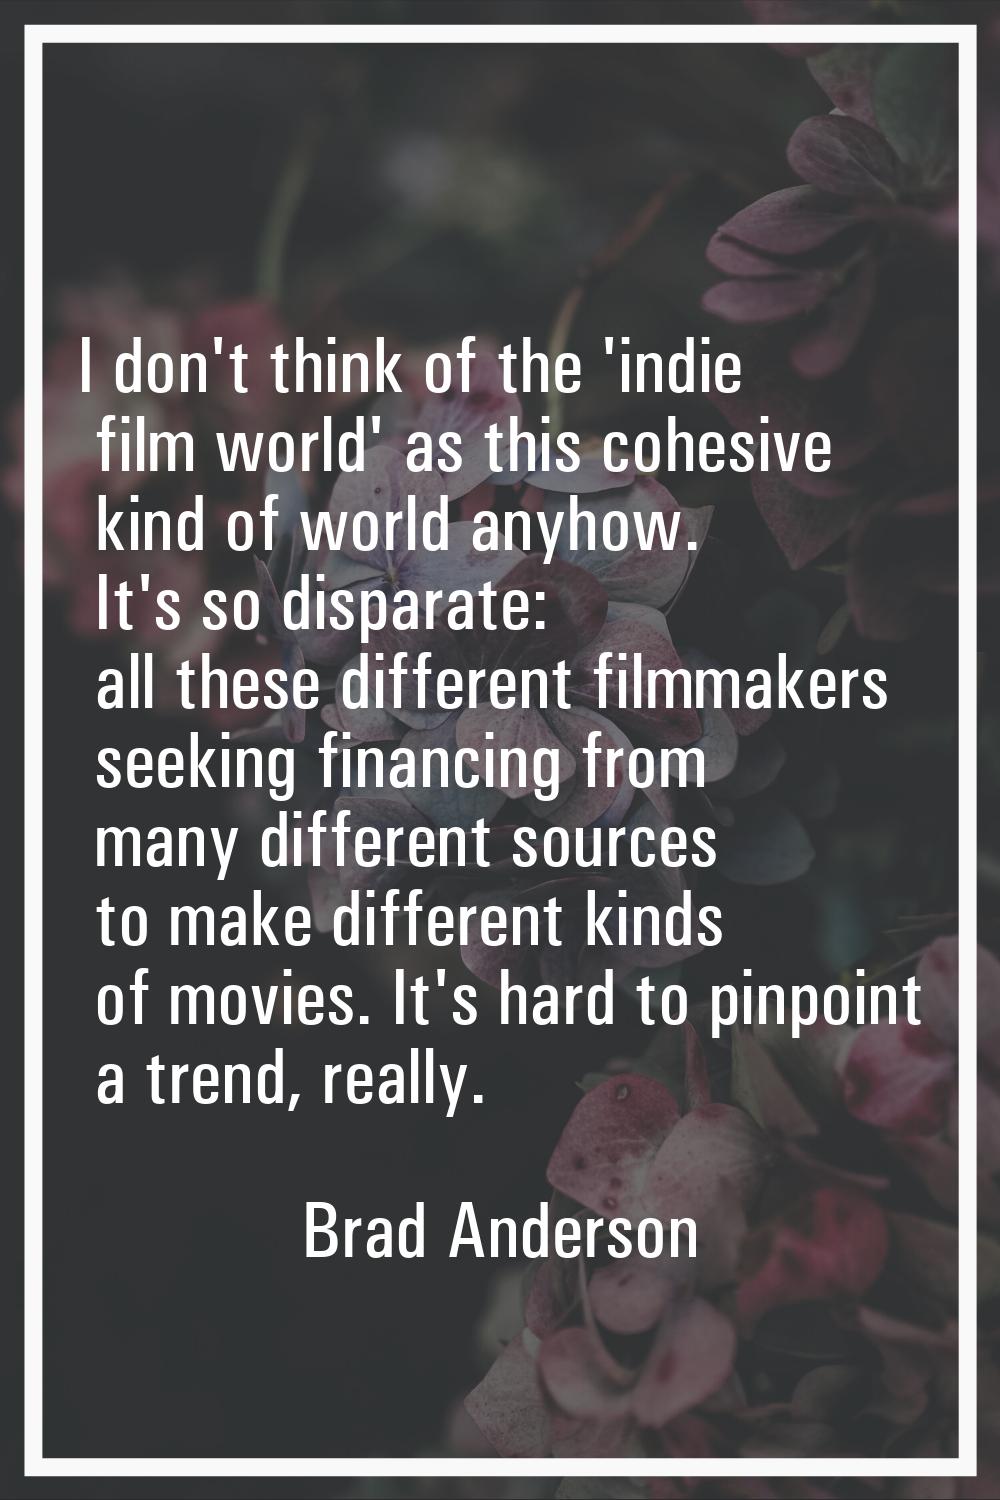 I don't think of the 'indie film world' as this cohesive kind of world anyhow. It's so disparate: a